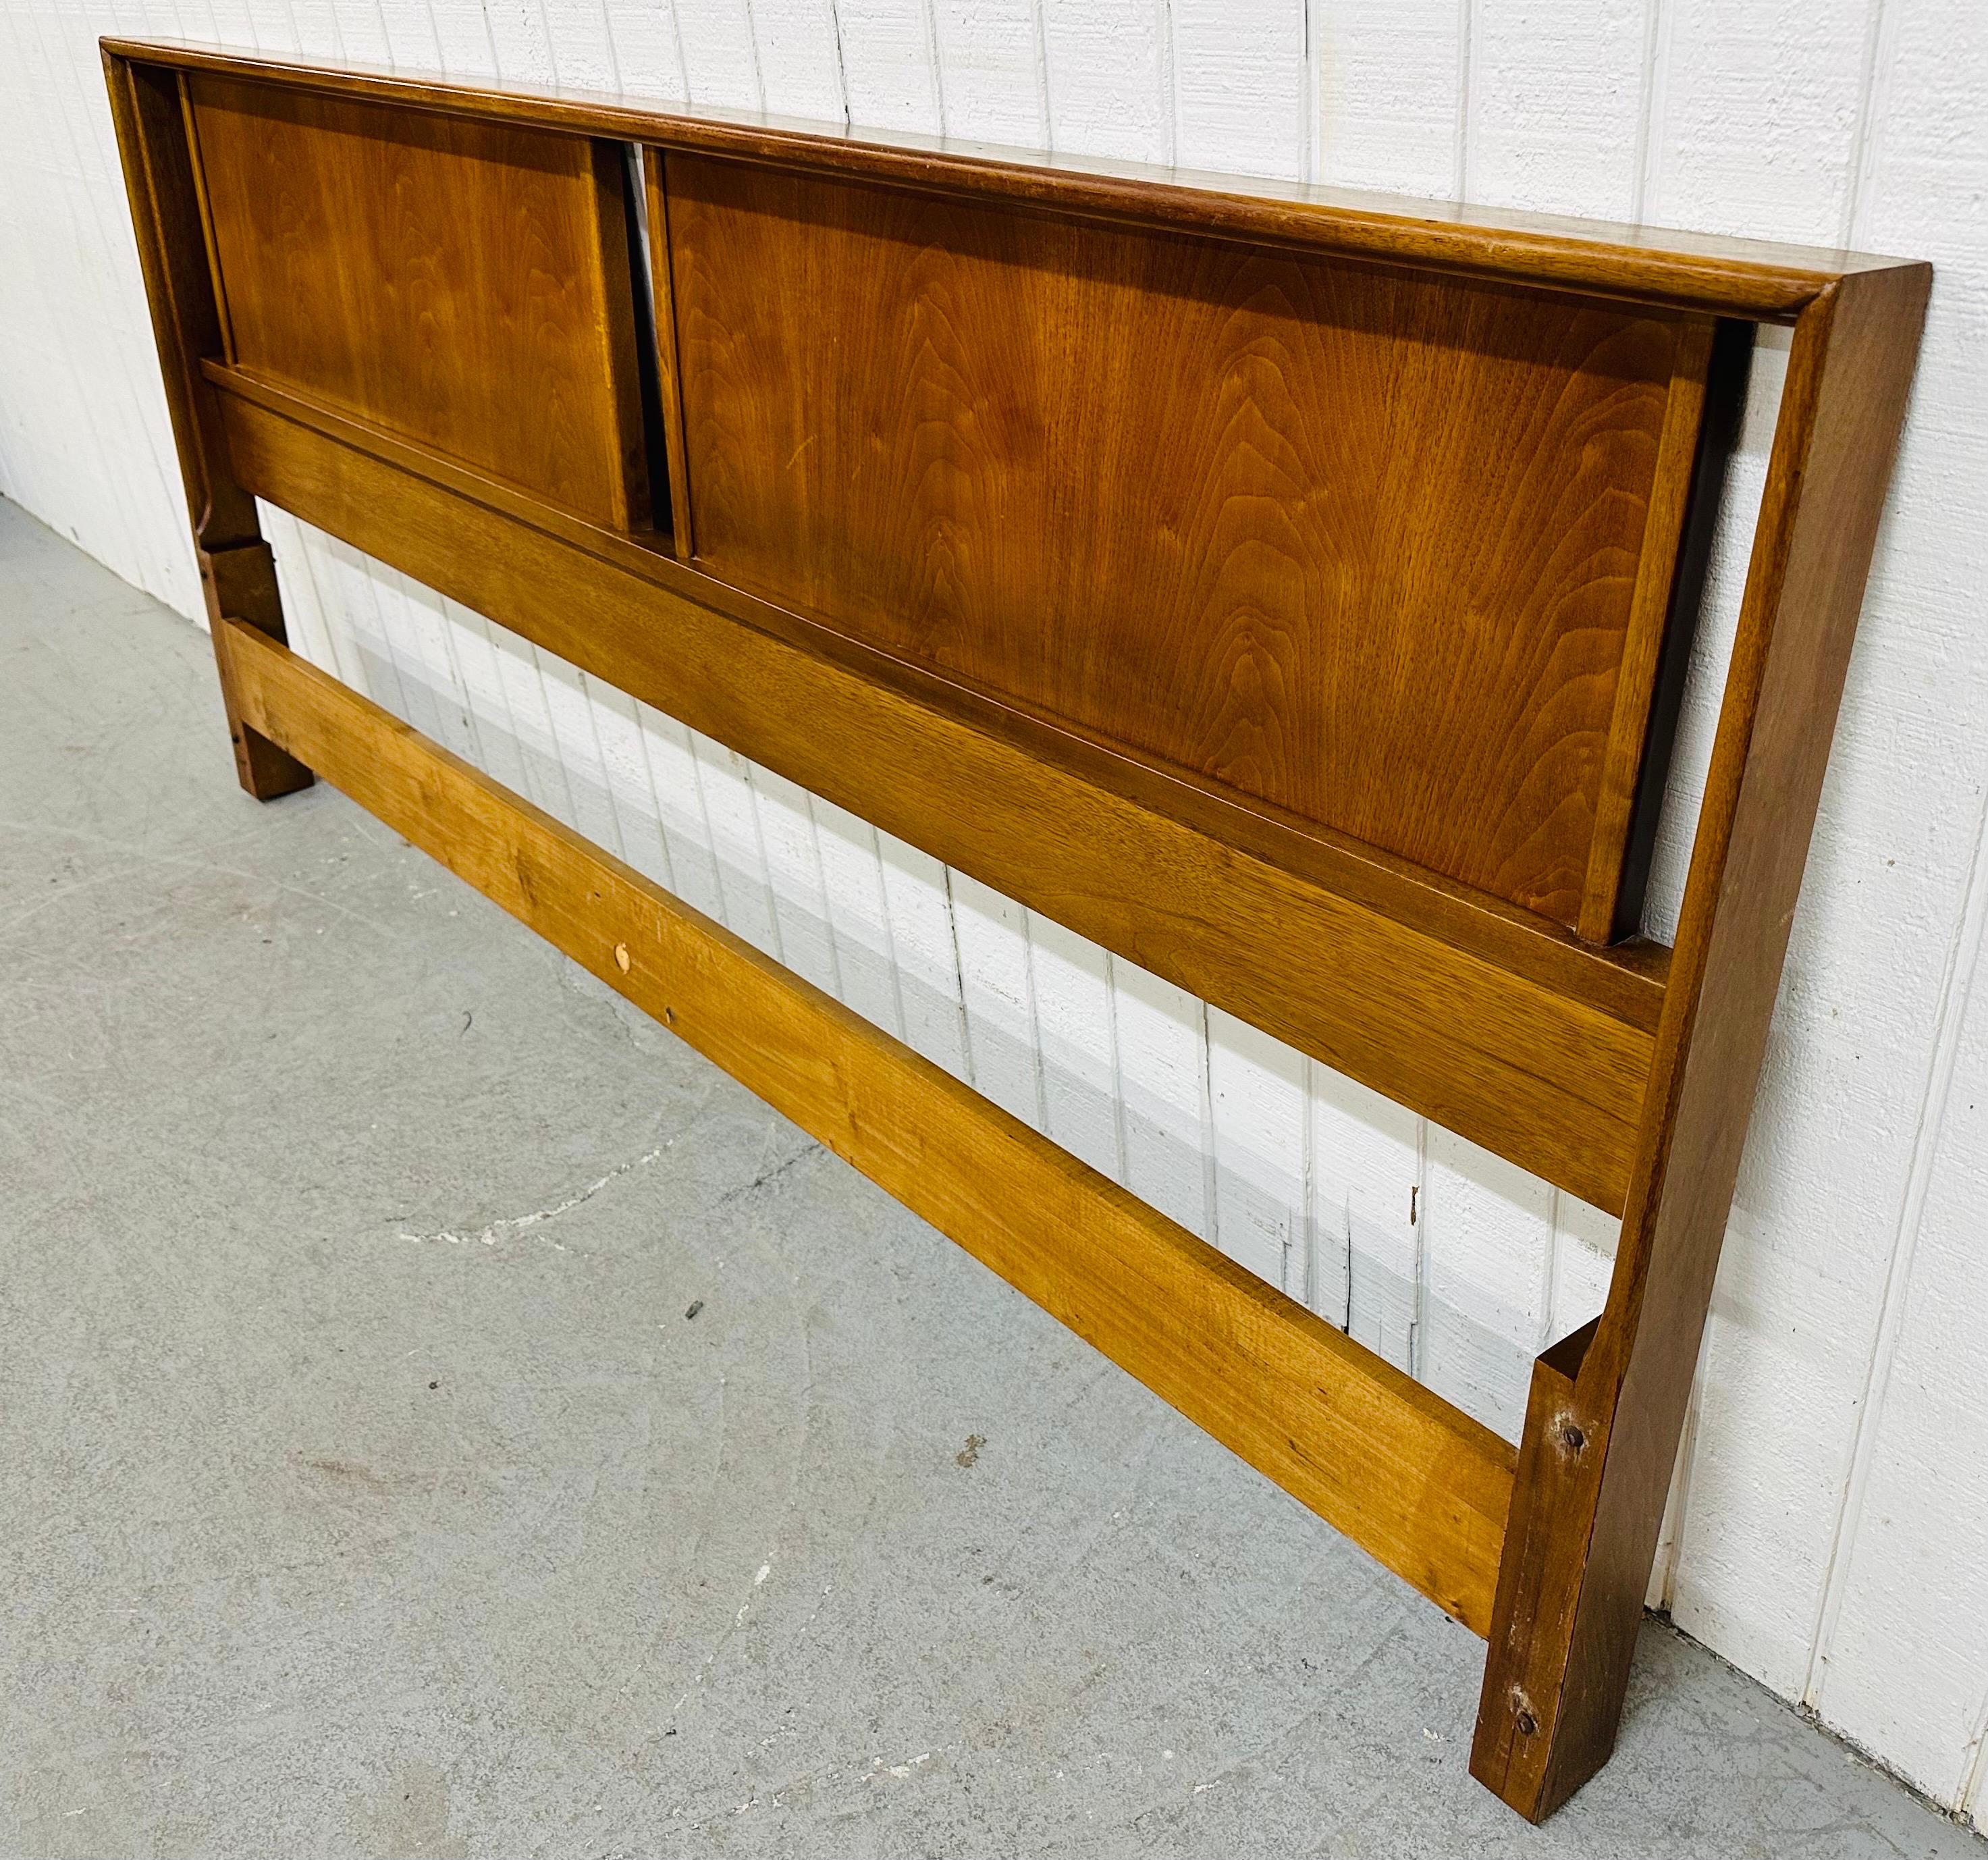 This listing is for a Mid-Century Modern John Stuart Walnut King Headboard. Featuring a straight line design, solid wood frame, and beautiful walnut finish. This is an exceptional combination of quality and design by John Stuart!